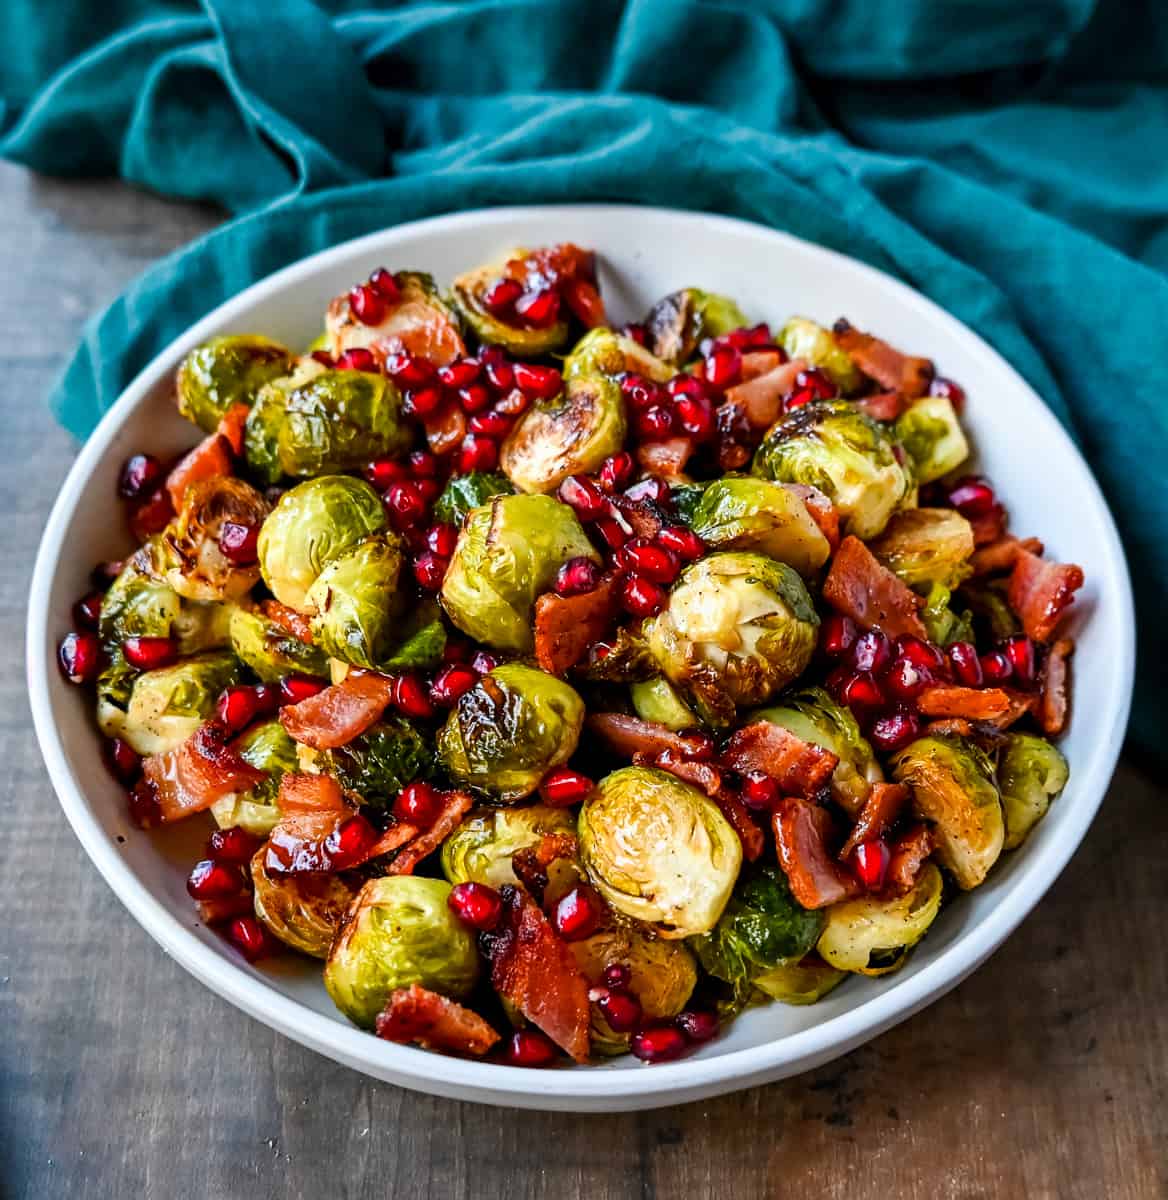 Roasted Brussels Sprouts with Bacon. These Roasted Brussels Sprouts are tossed in extra-virgin olive oil and spices and cooked until soft on the inside and crispy on the outside then drizzled with real maple syrup and served with crispy bacon and crunchy pomegranates. The perfect Fall and holiday side dish recipe.